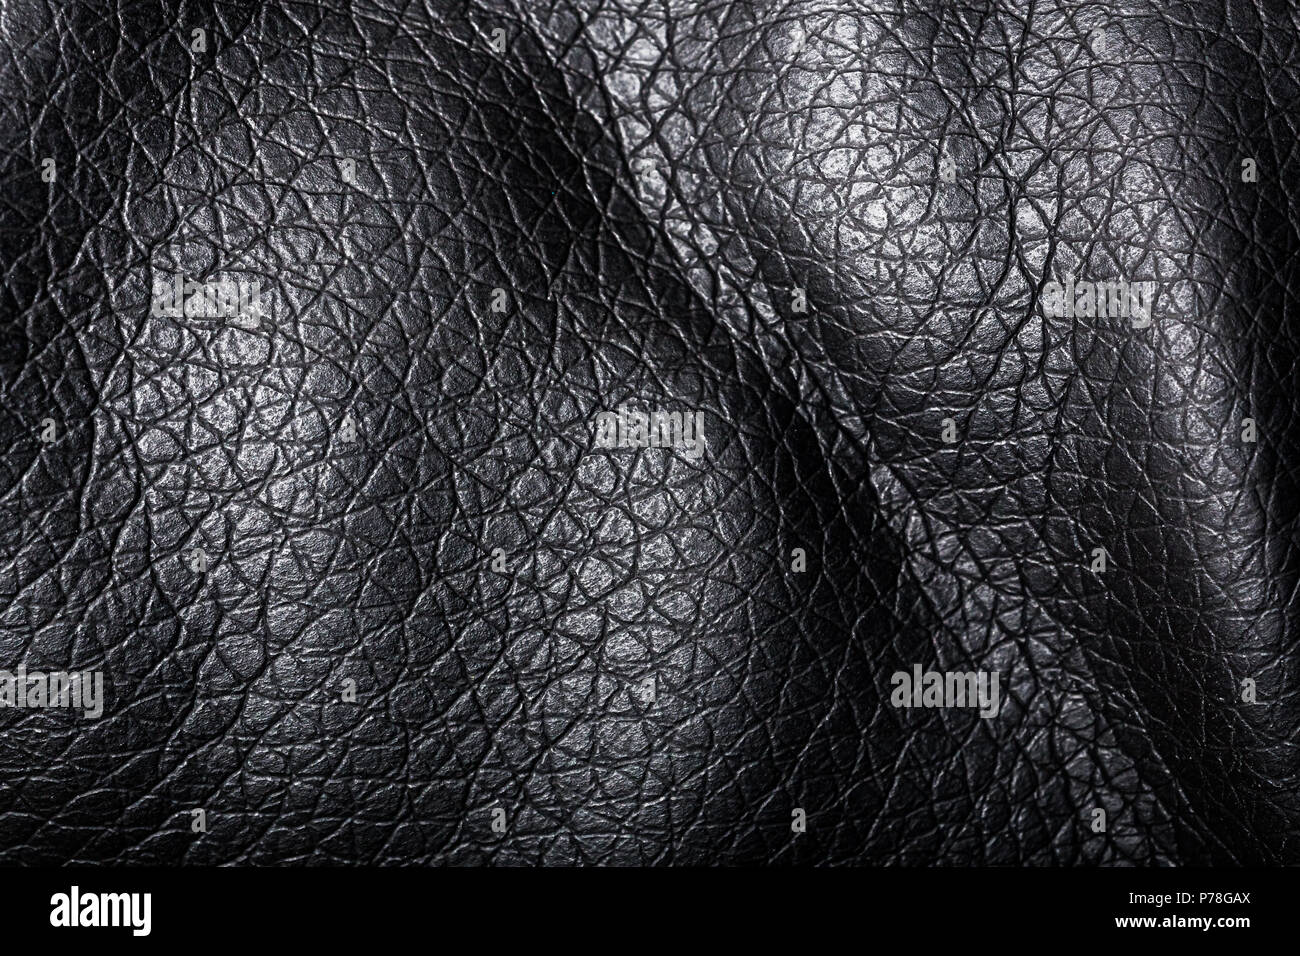 Wave forms of dark fabric texture Stock Photo